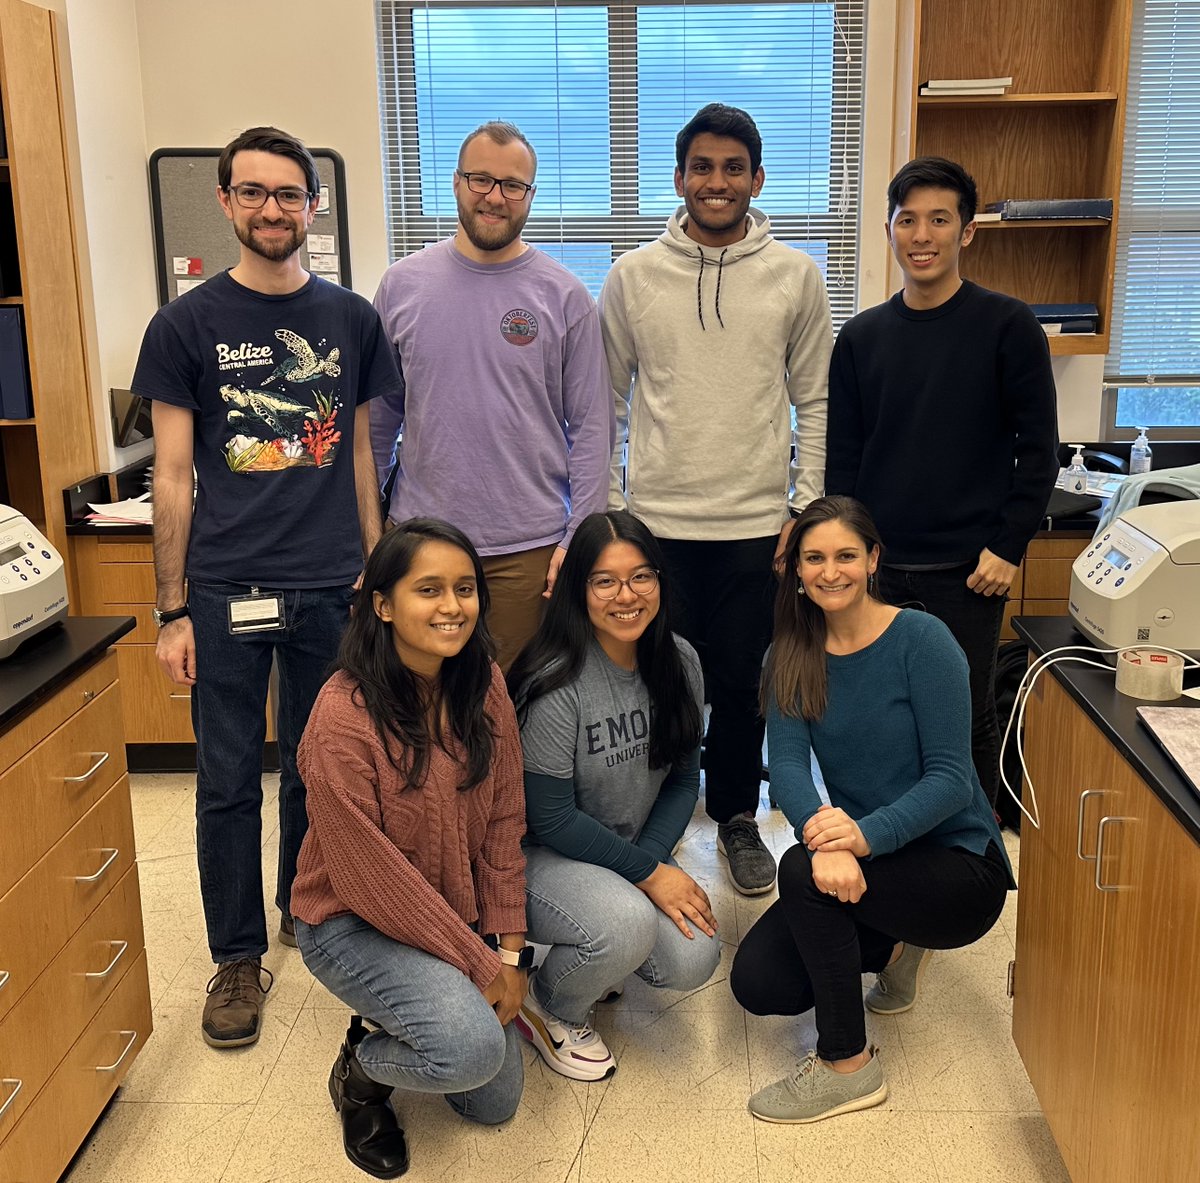 We are excited to welcome Master's Student @KhushiTekale (who joins us all the way from India) as well as Cancer Biology rotation student Connor Stewart!